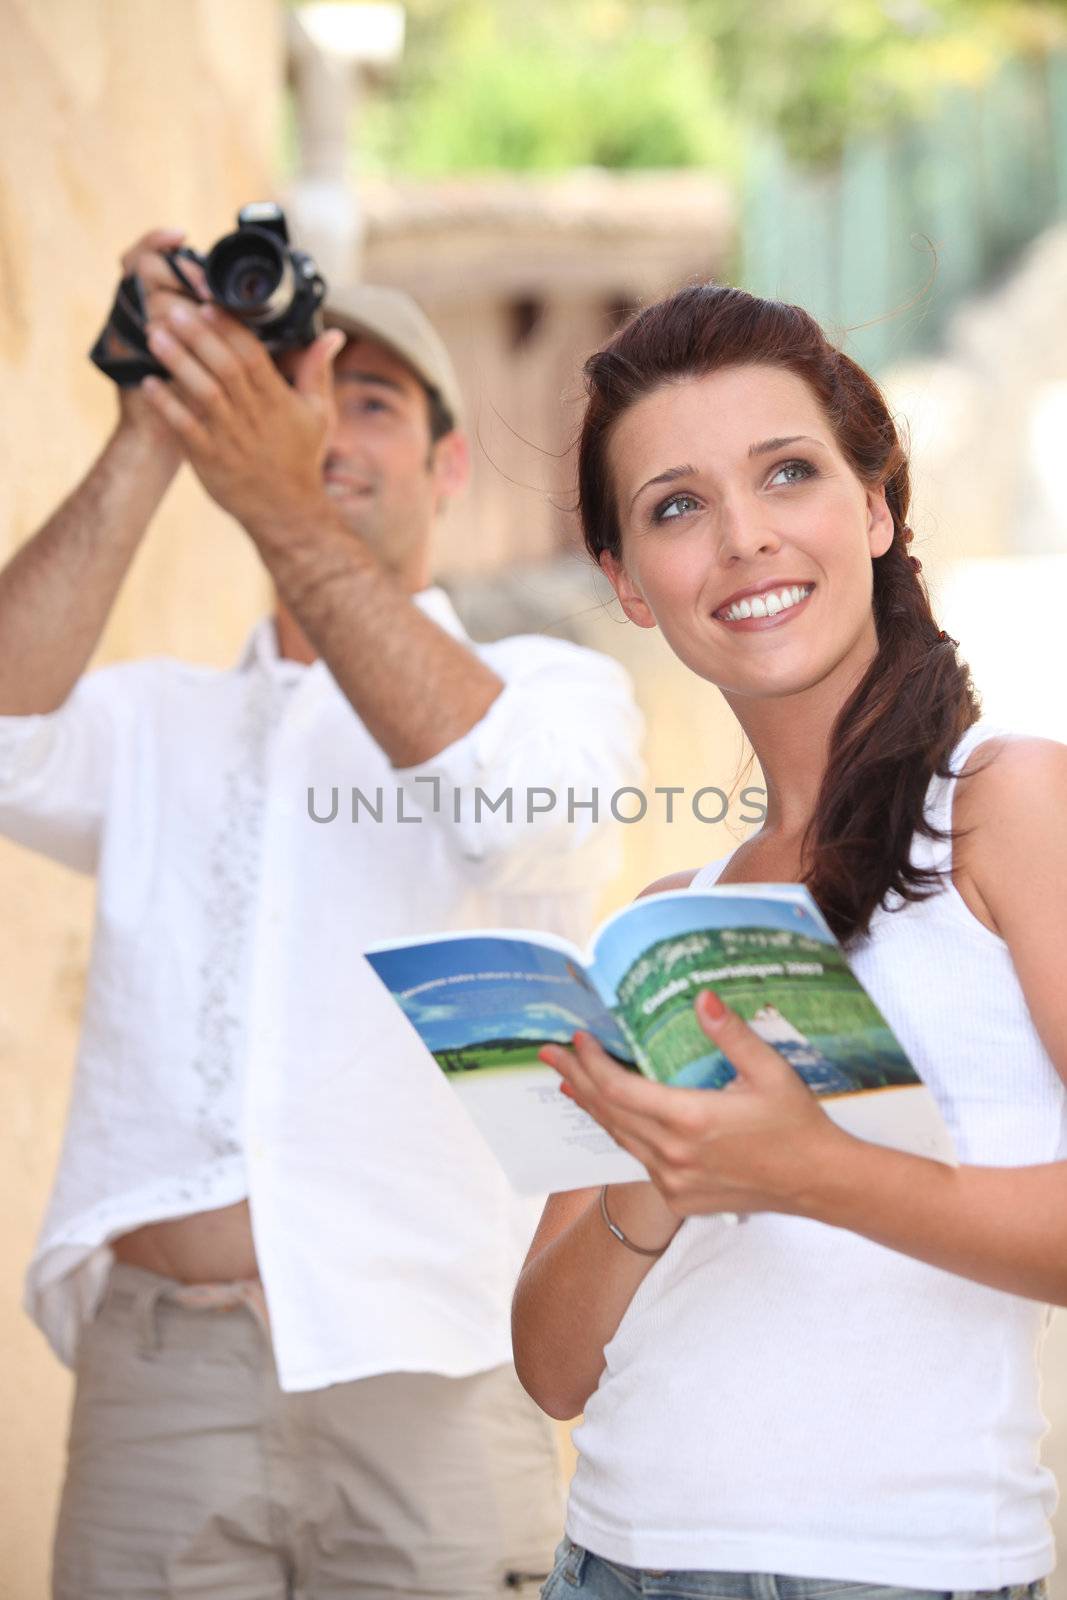 Tourists with camera and travel guide by phovoir